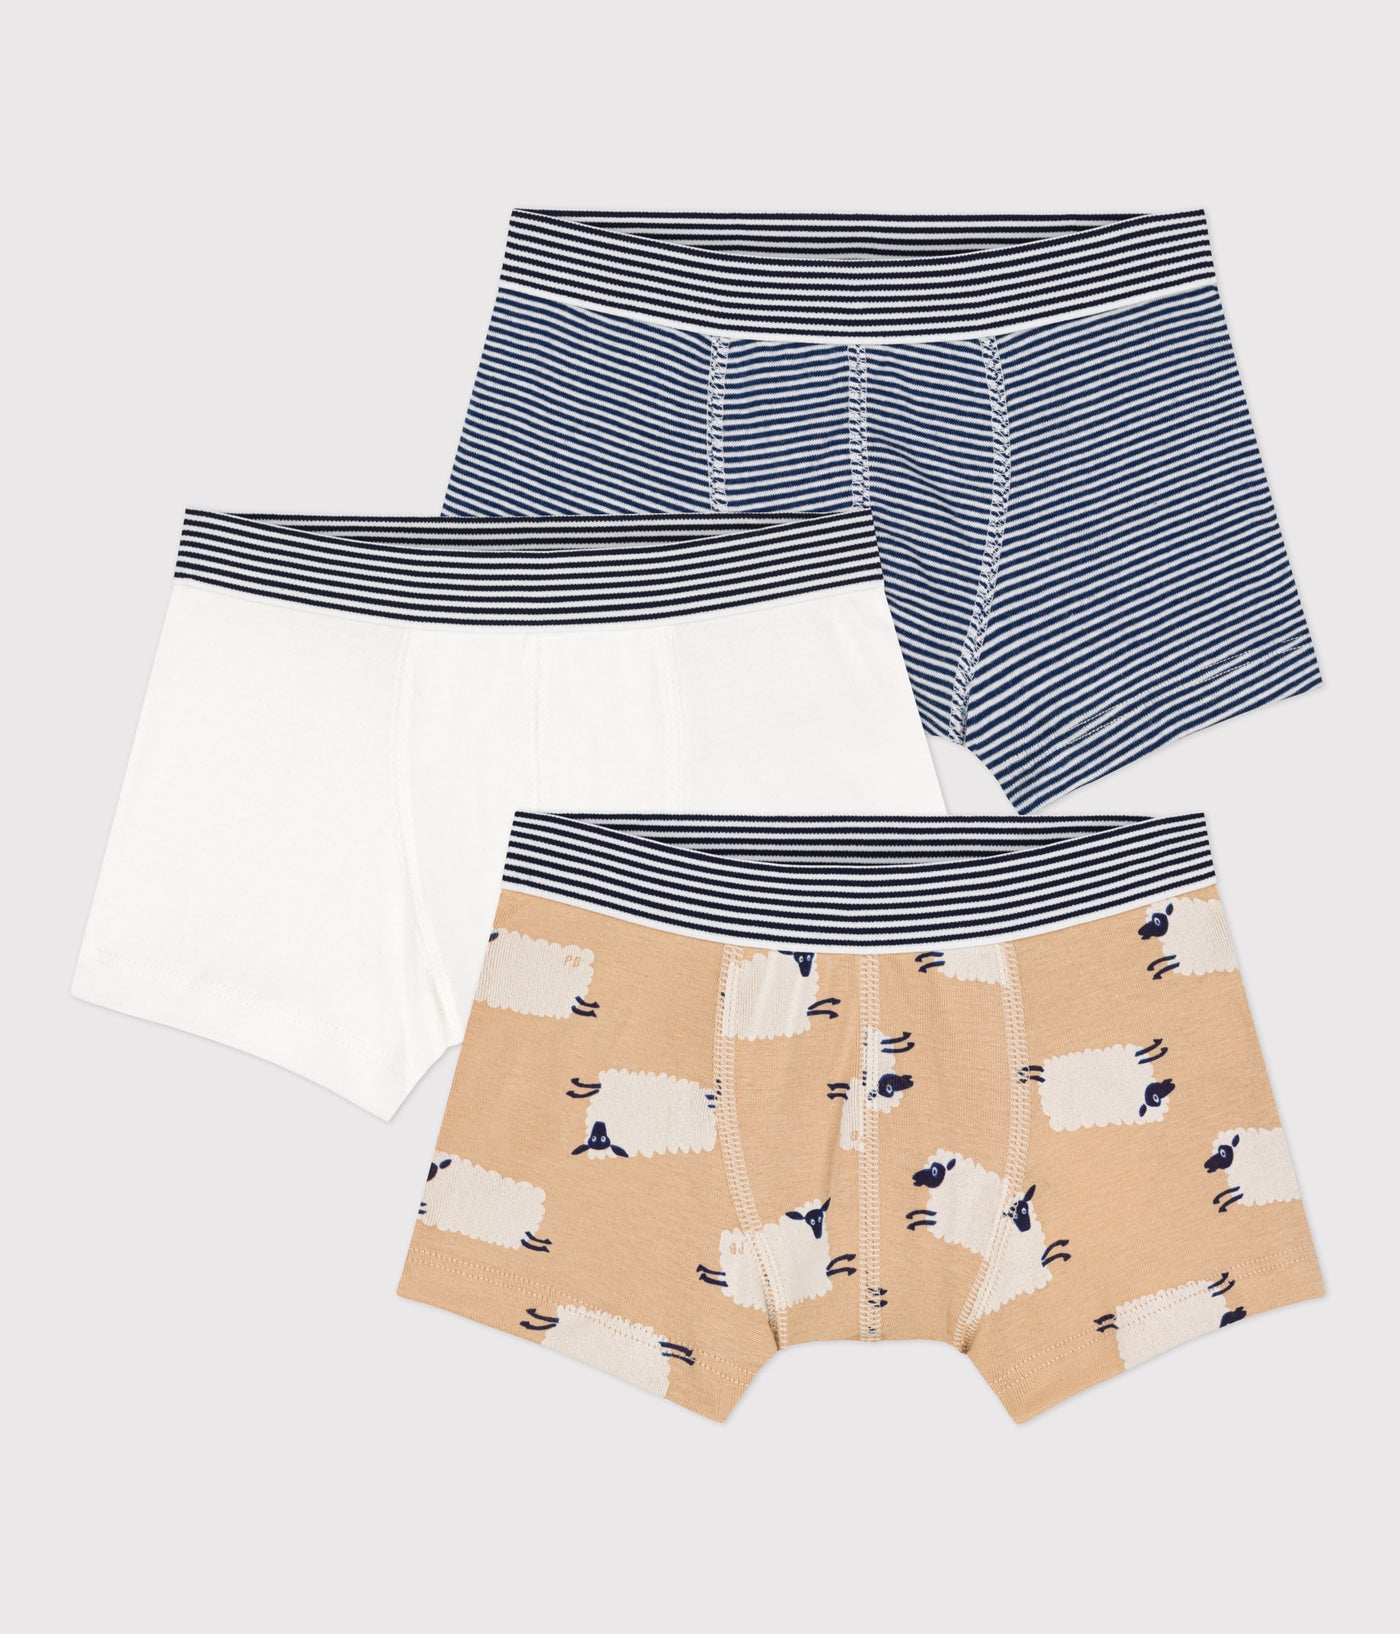 BOYS' SHEEP PATTERNED COTTON BOXER SHORTS - 3-PACK